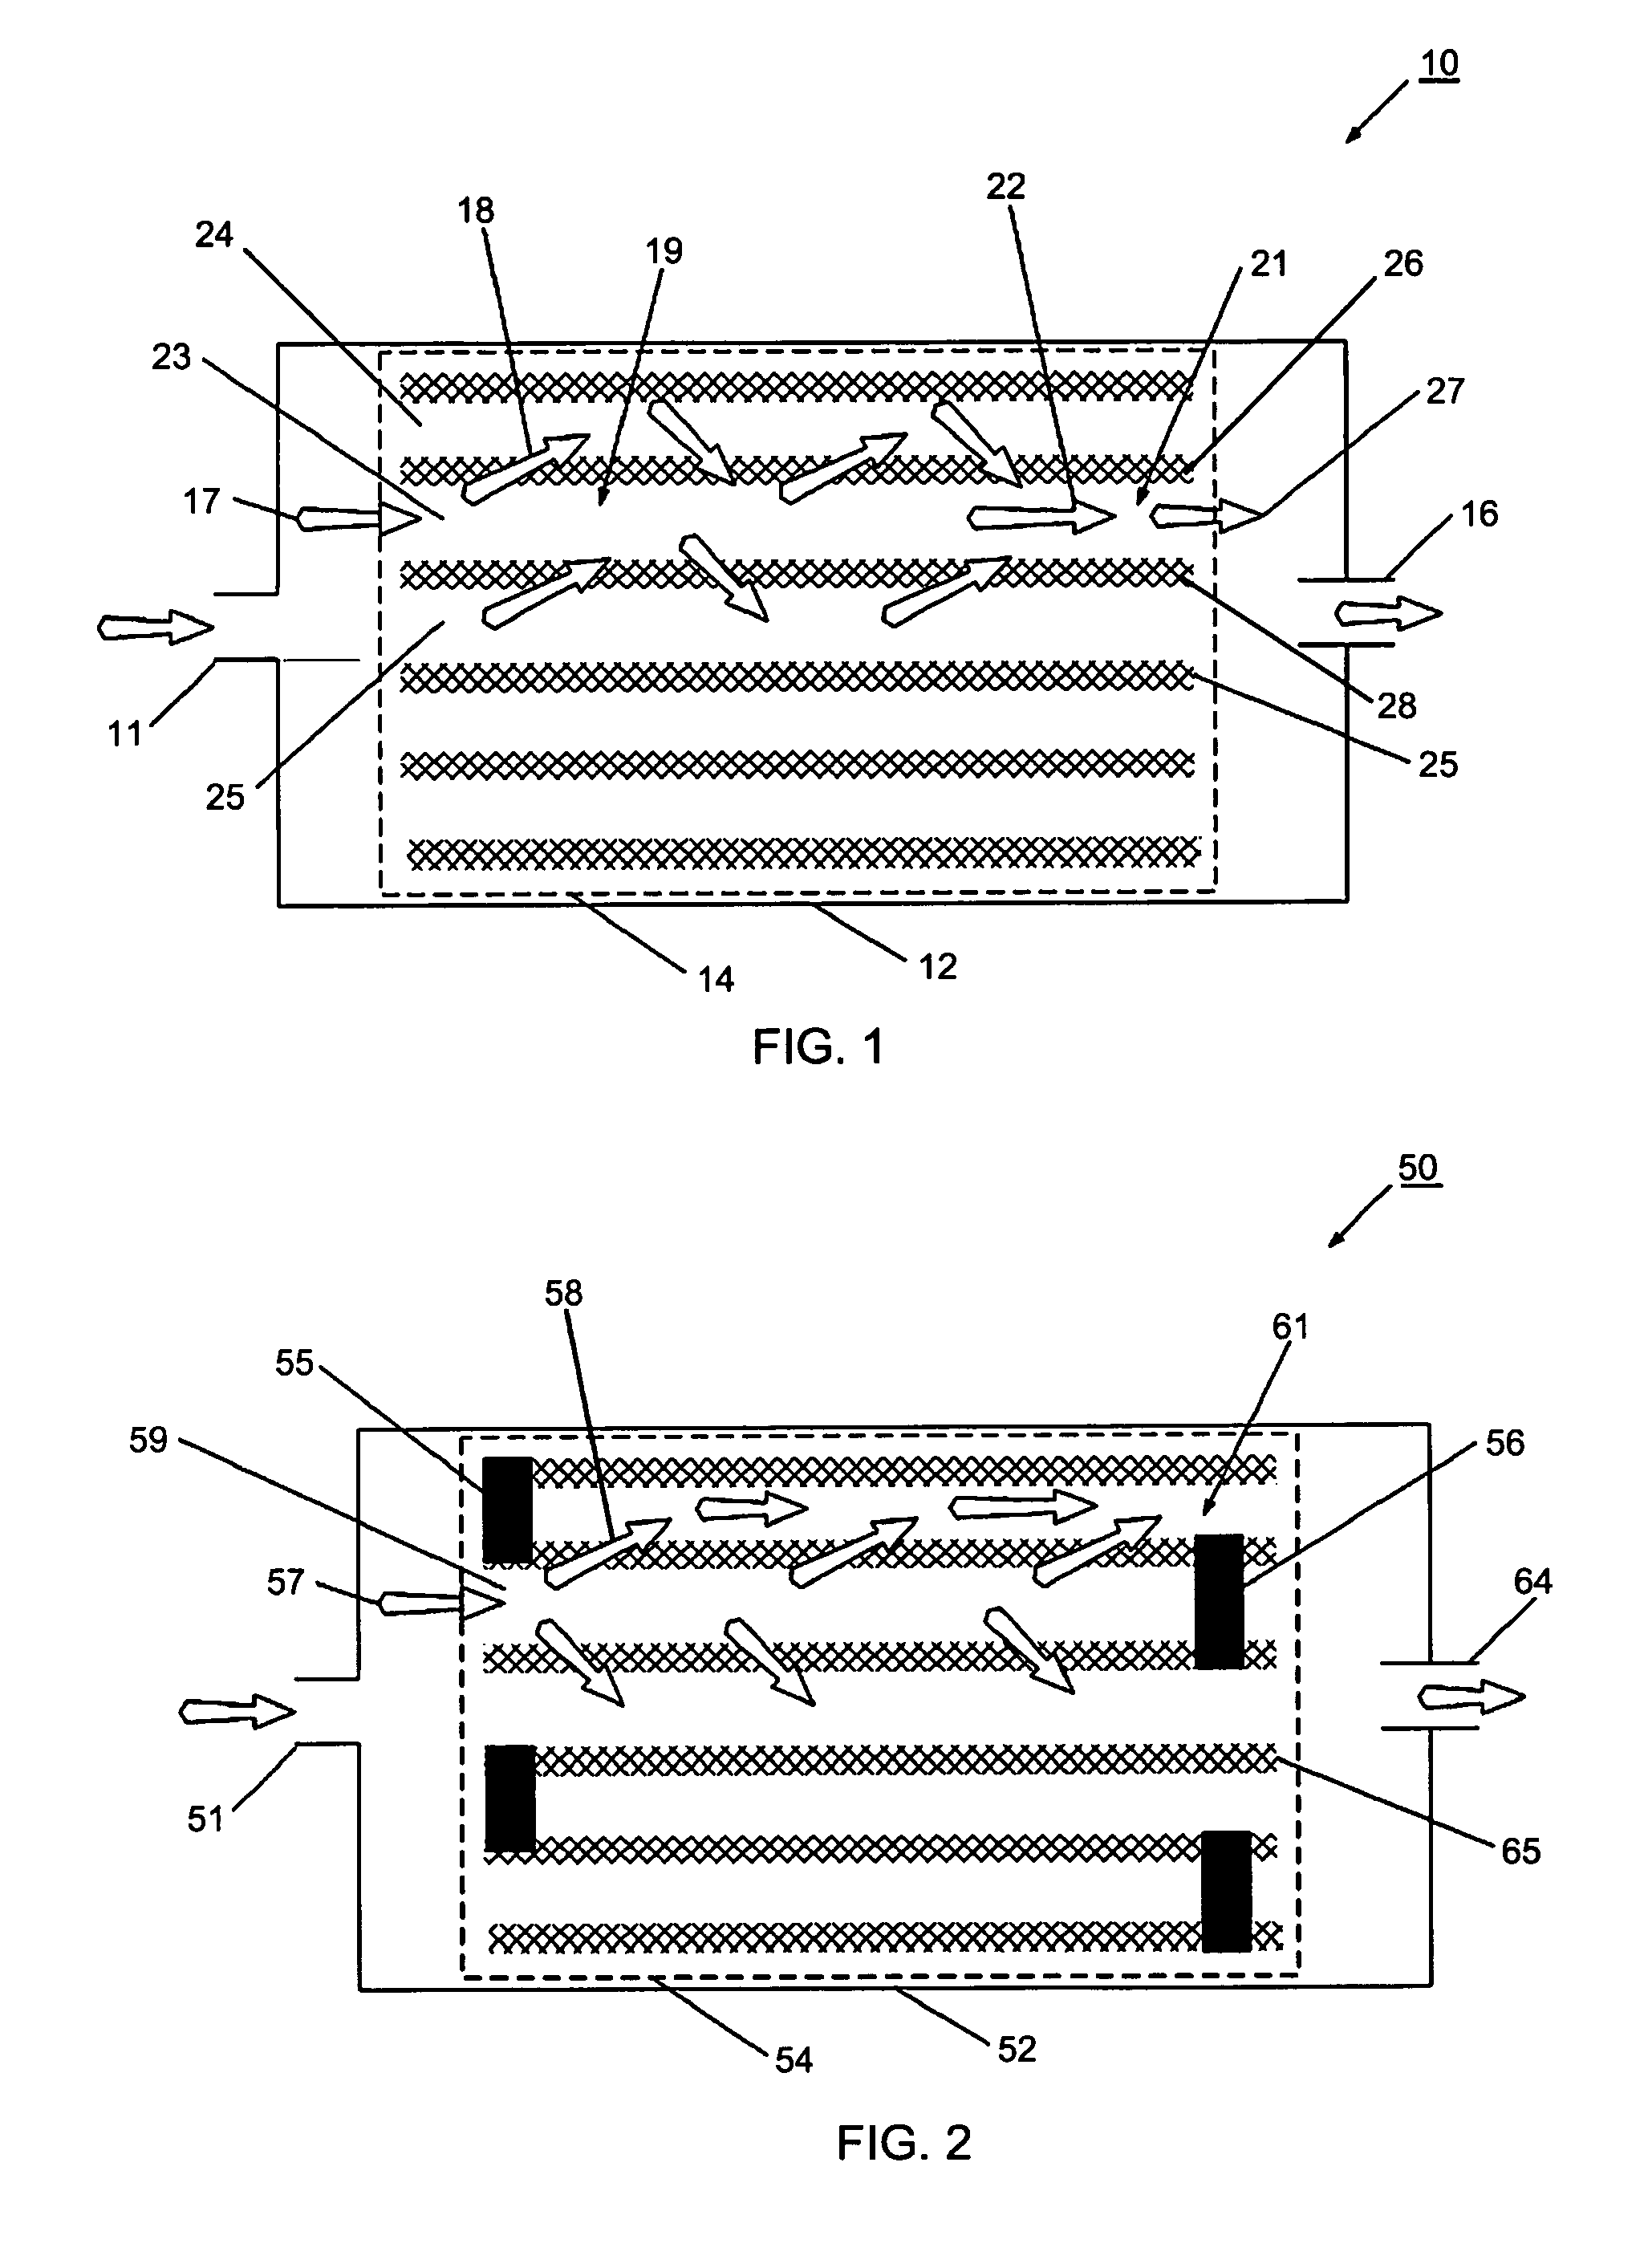 Highly porous mullite particulate filter substrate